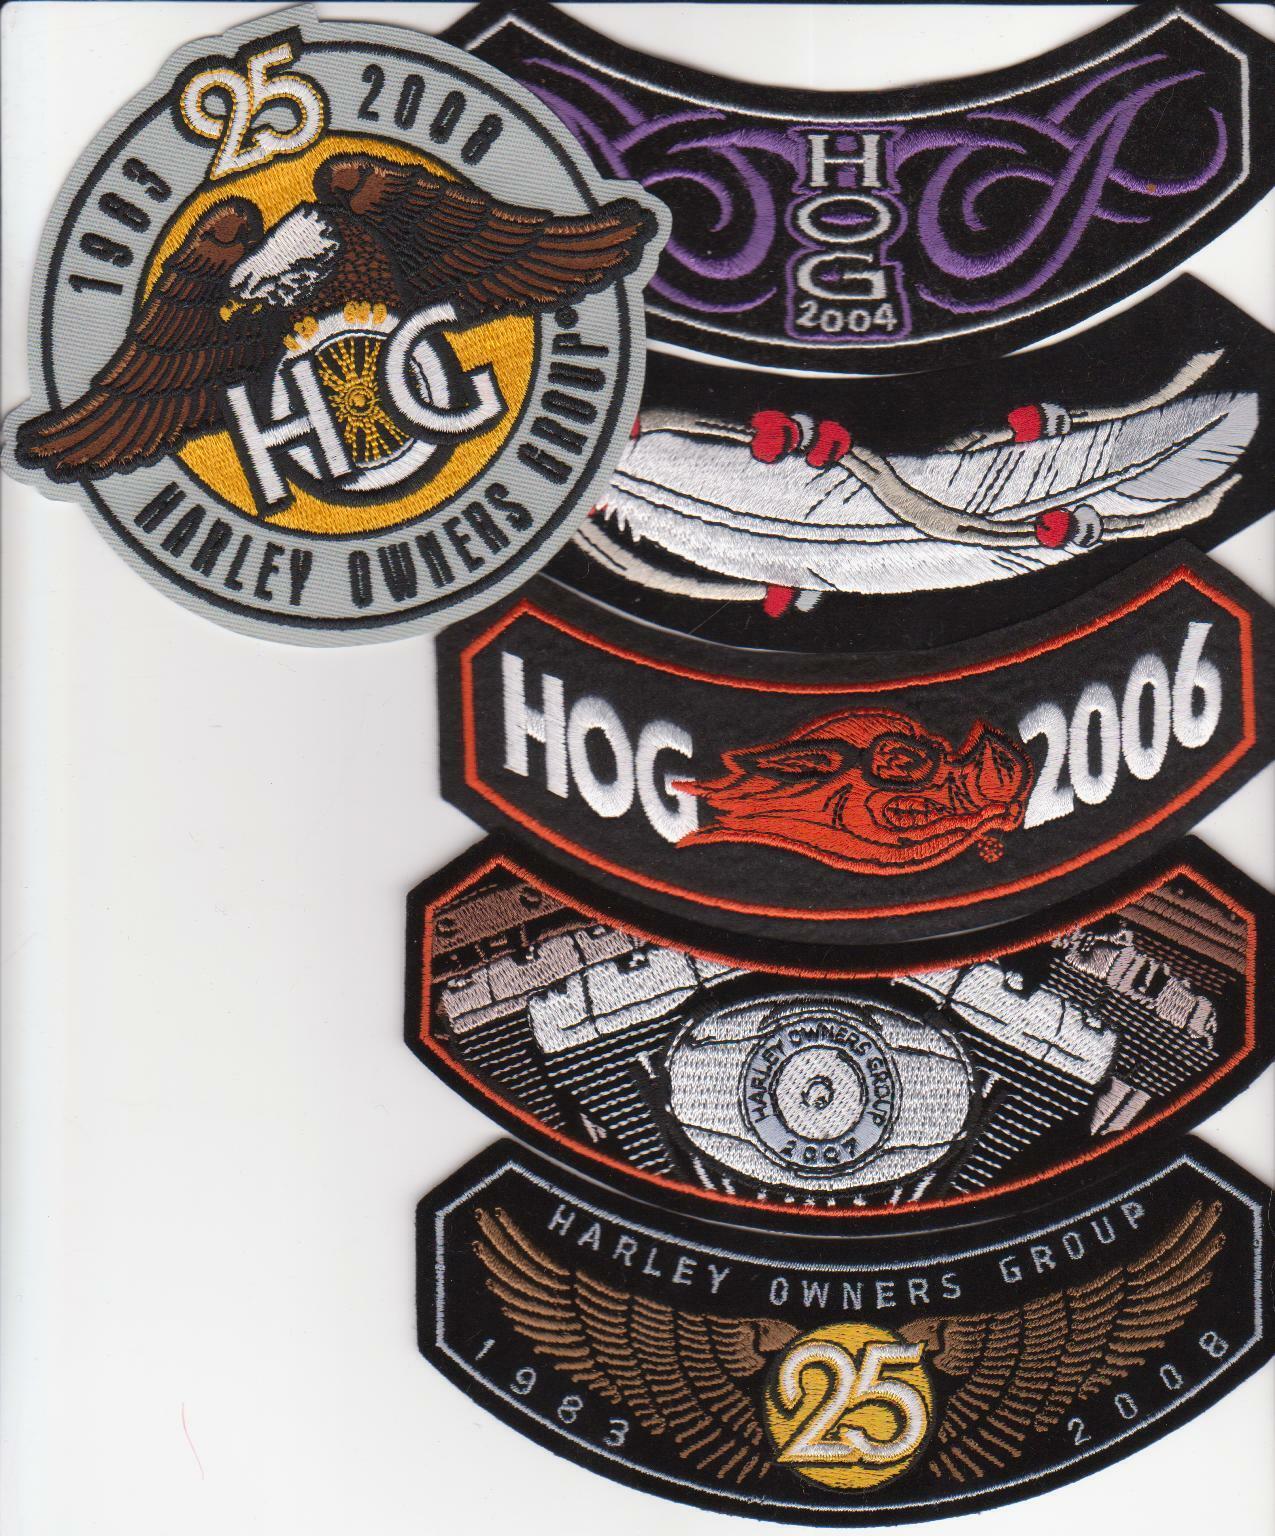 HOG 2004, 2005, 2006, 2007, 2008 & 25th Anniversary patches HARLEY OWNERS GROUP